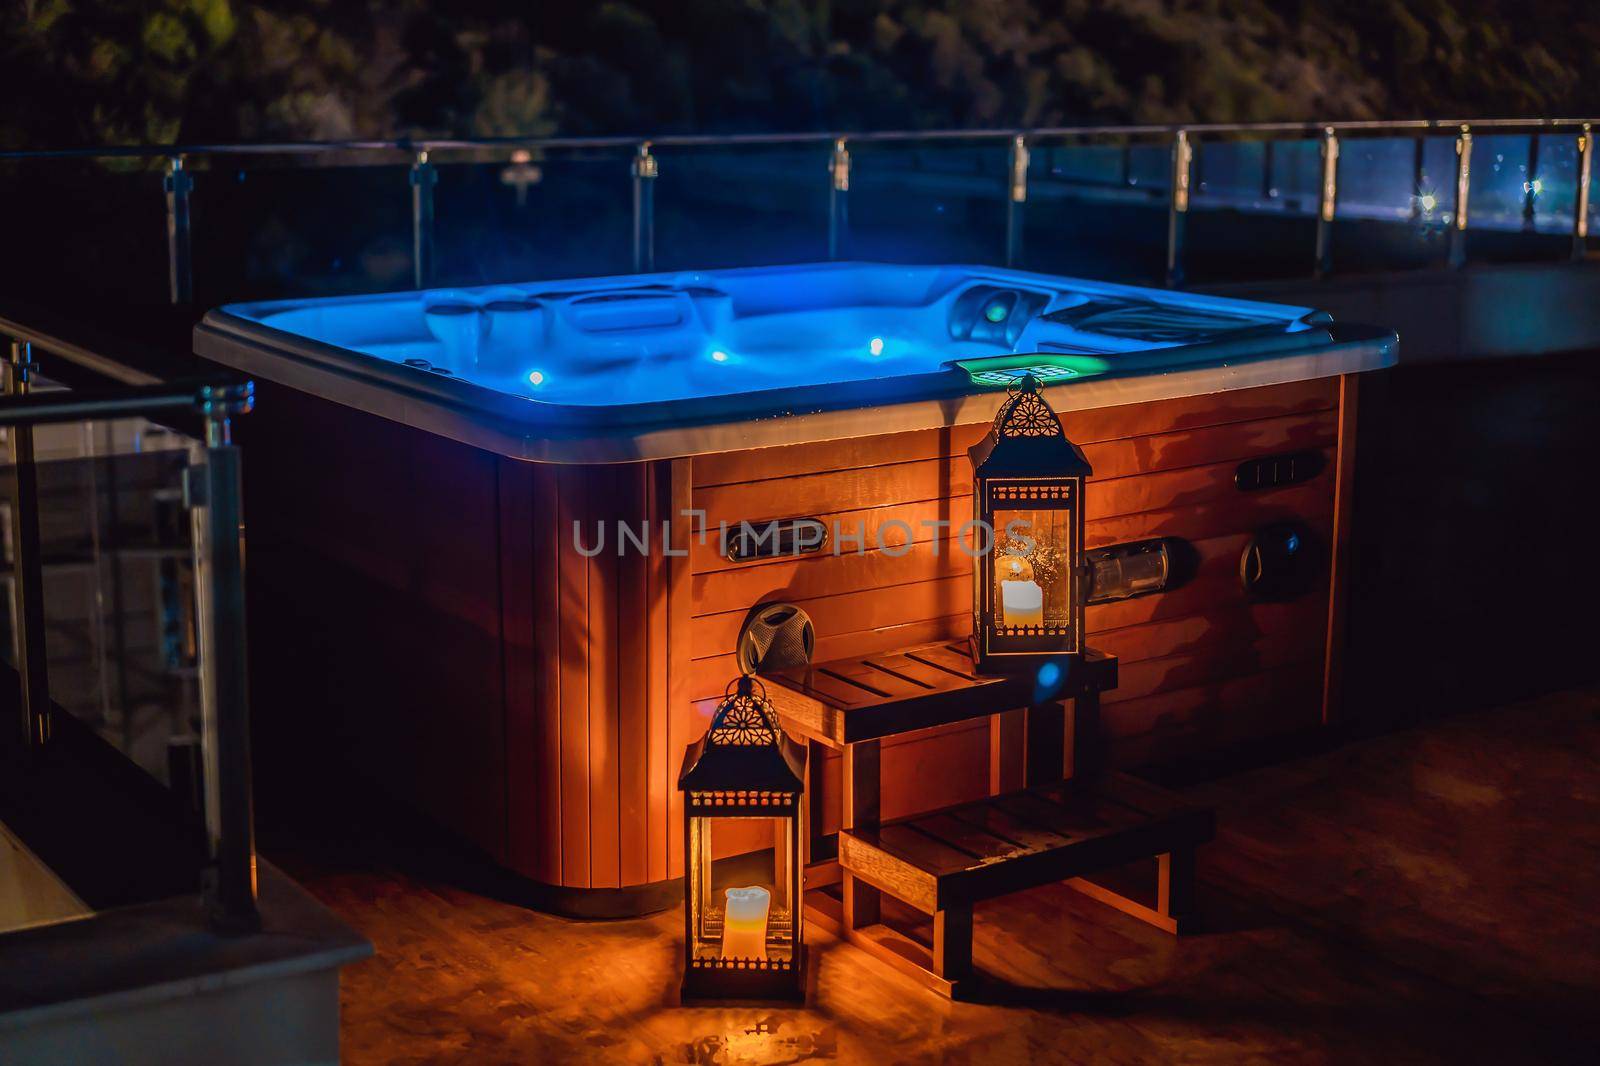 Hot tub with candles ready to take a bath. Valentines day concept by galitskaya